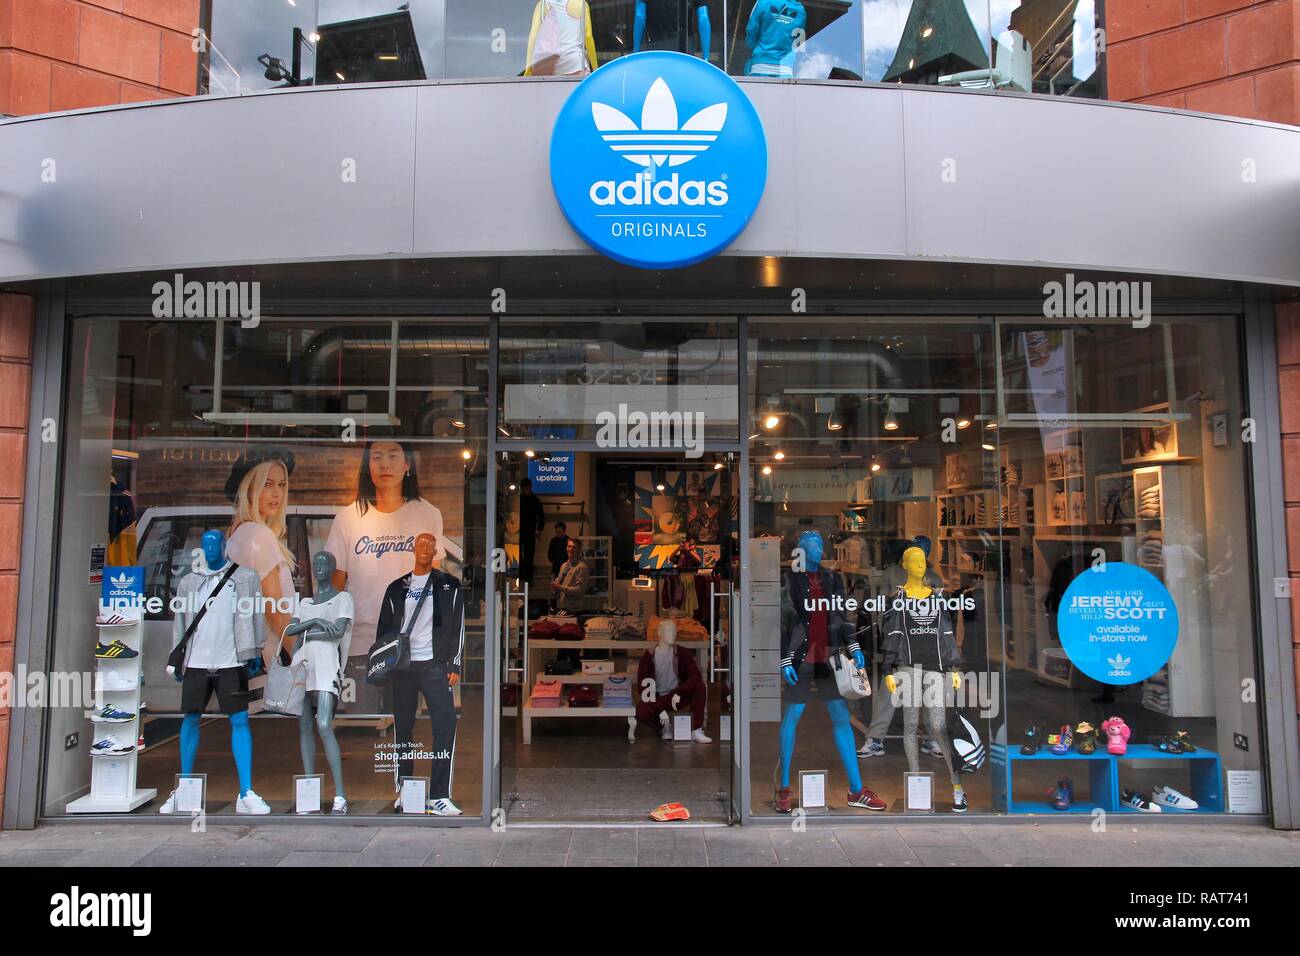 LIVERPOOL, UK - APRIL 20, 2013: Adidas store in Liverpool, UK. Adidas  corporation exists since 1924 and had EUR 14.5bn revenue in 2012 Stock  Photo - Alamy